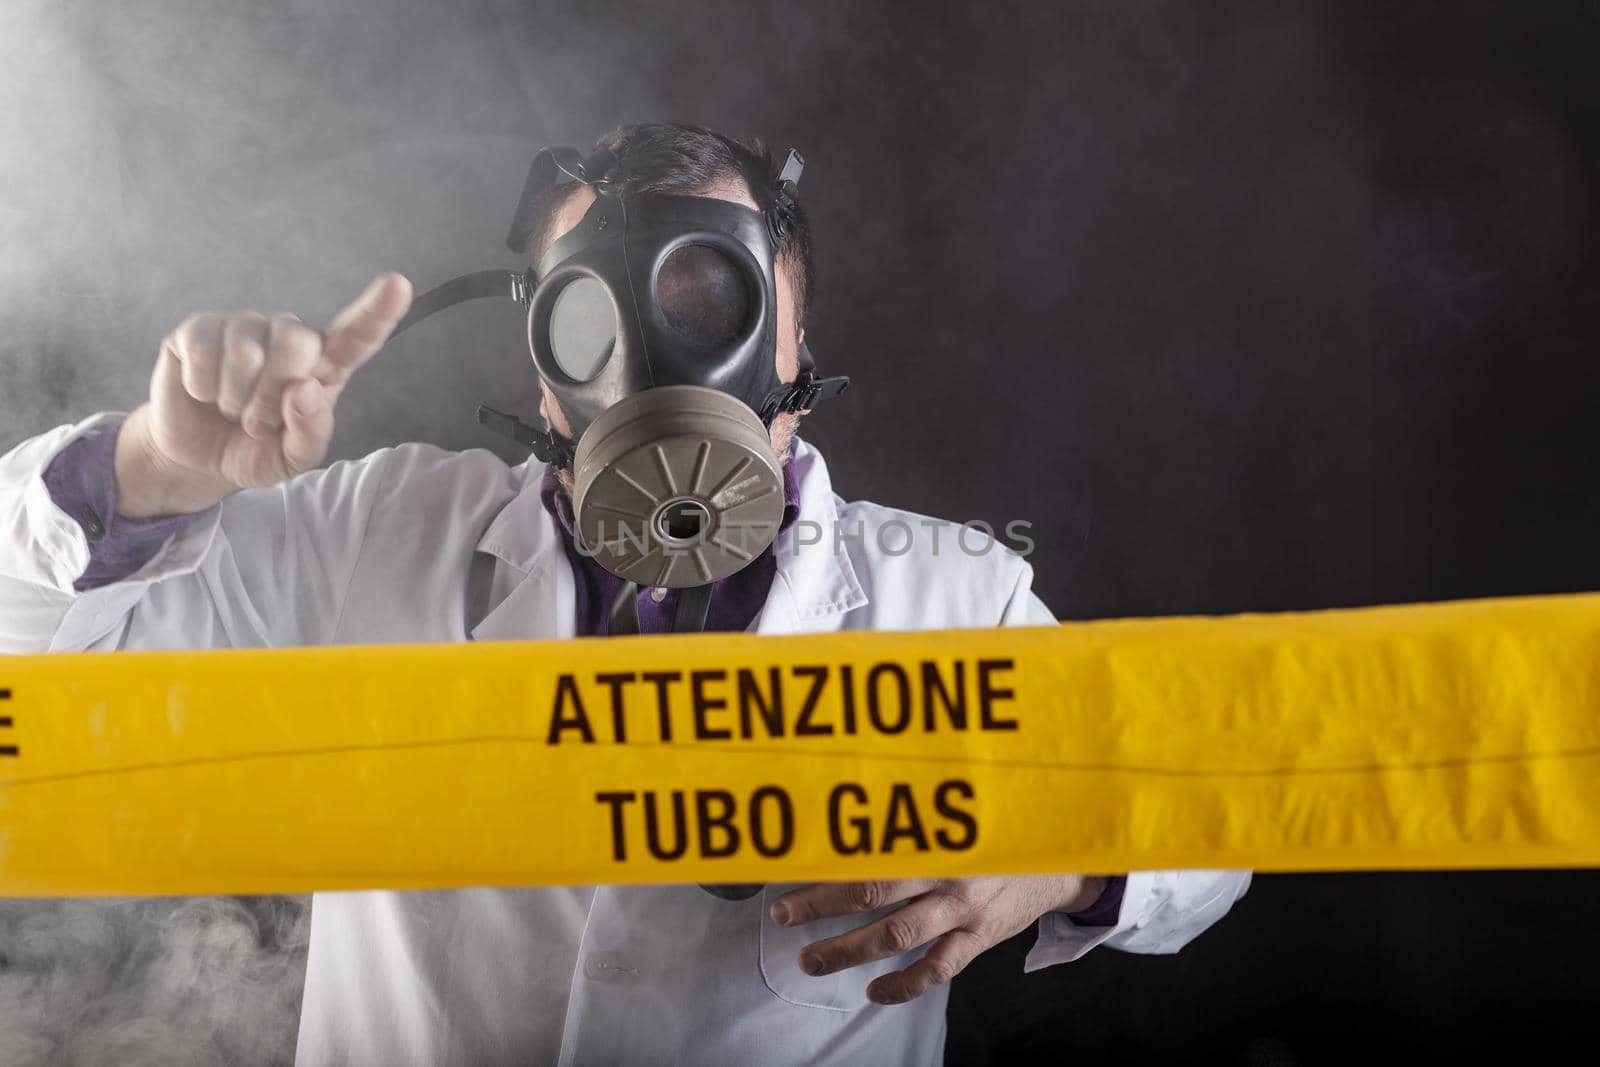 A medical engineer with antigas mask during the gas leaks crisis by bepsimage